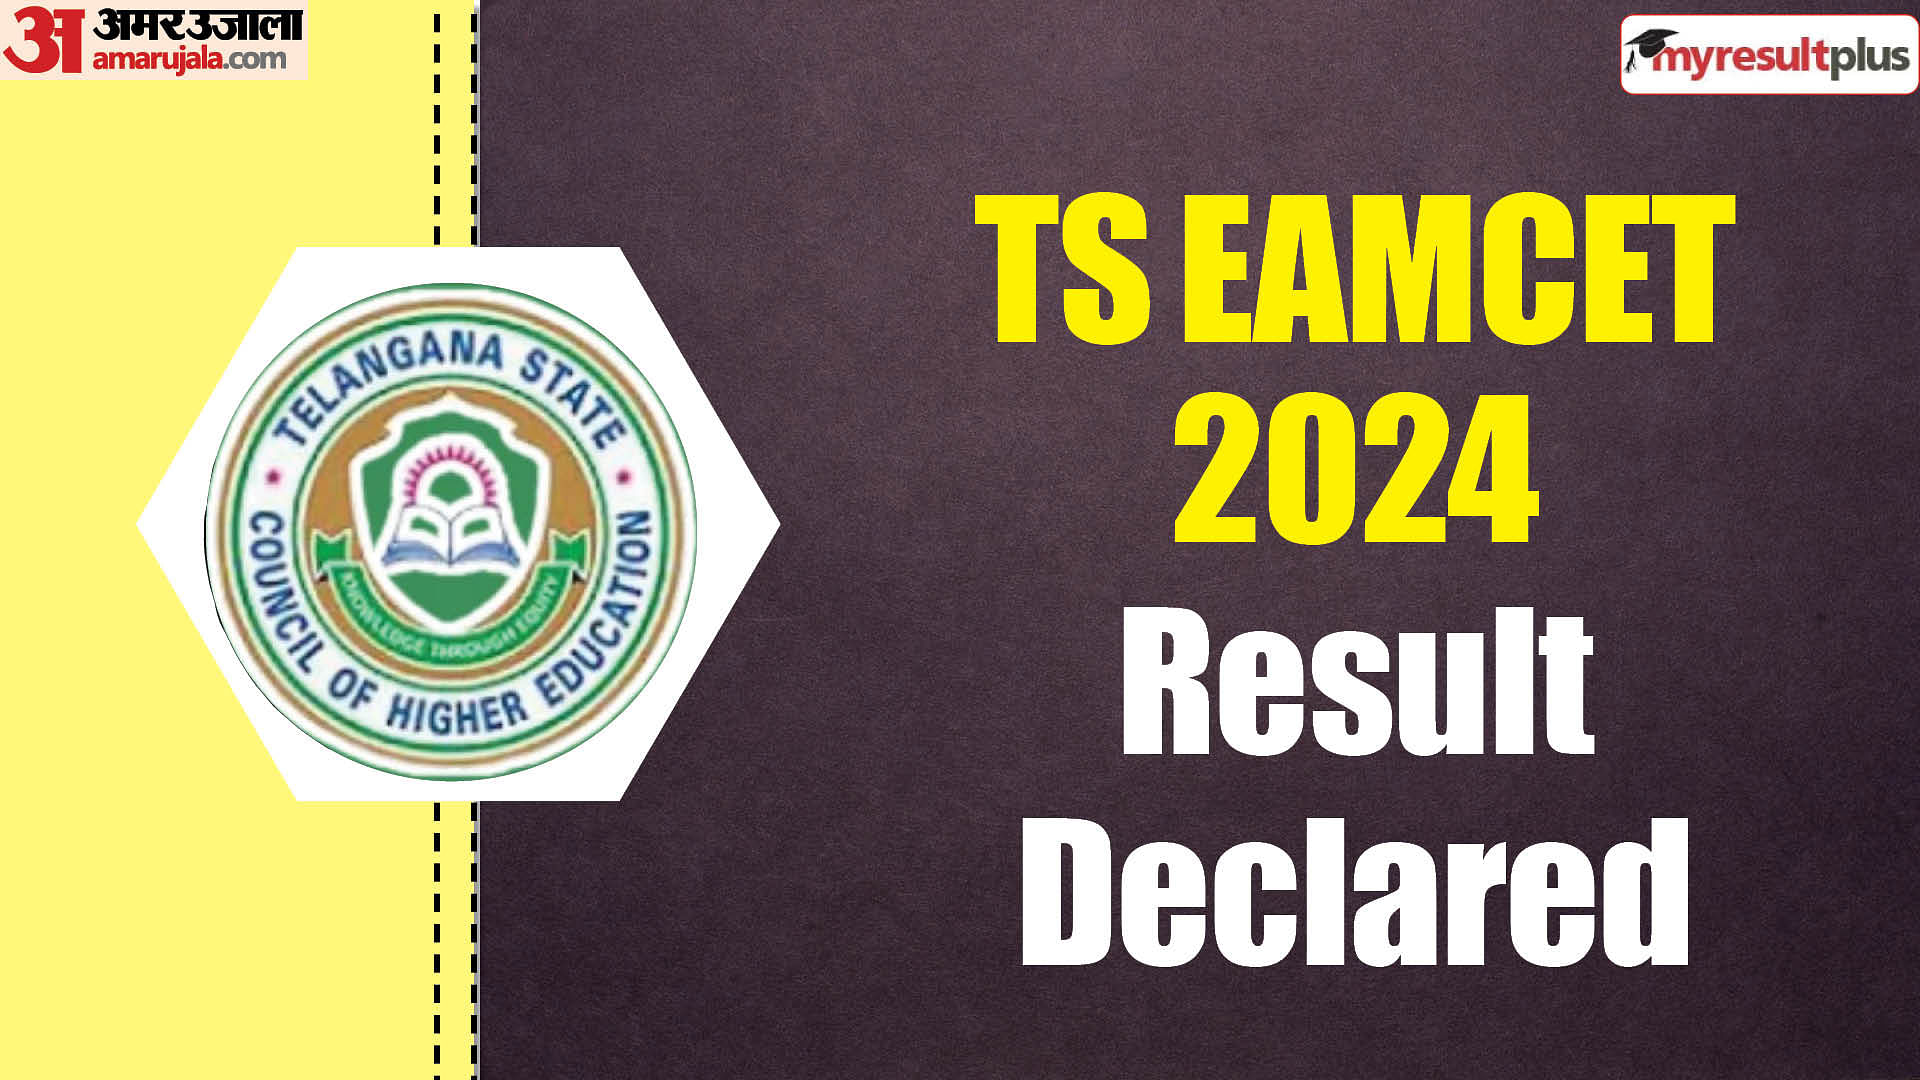 TS EAMCET Result 2024 Out now, Read the pass percentage and Name of toppers here